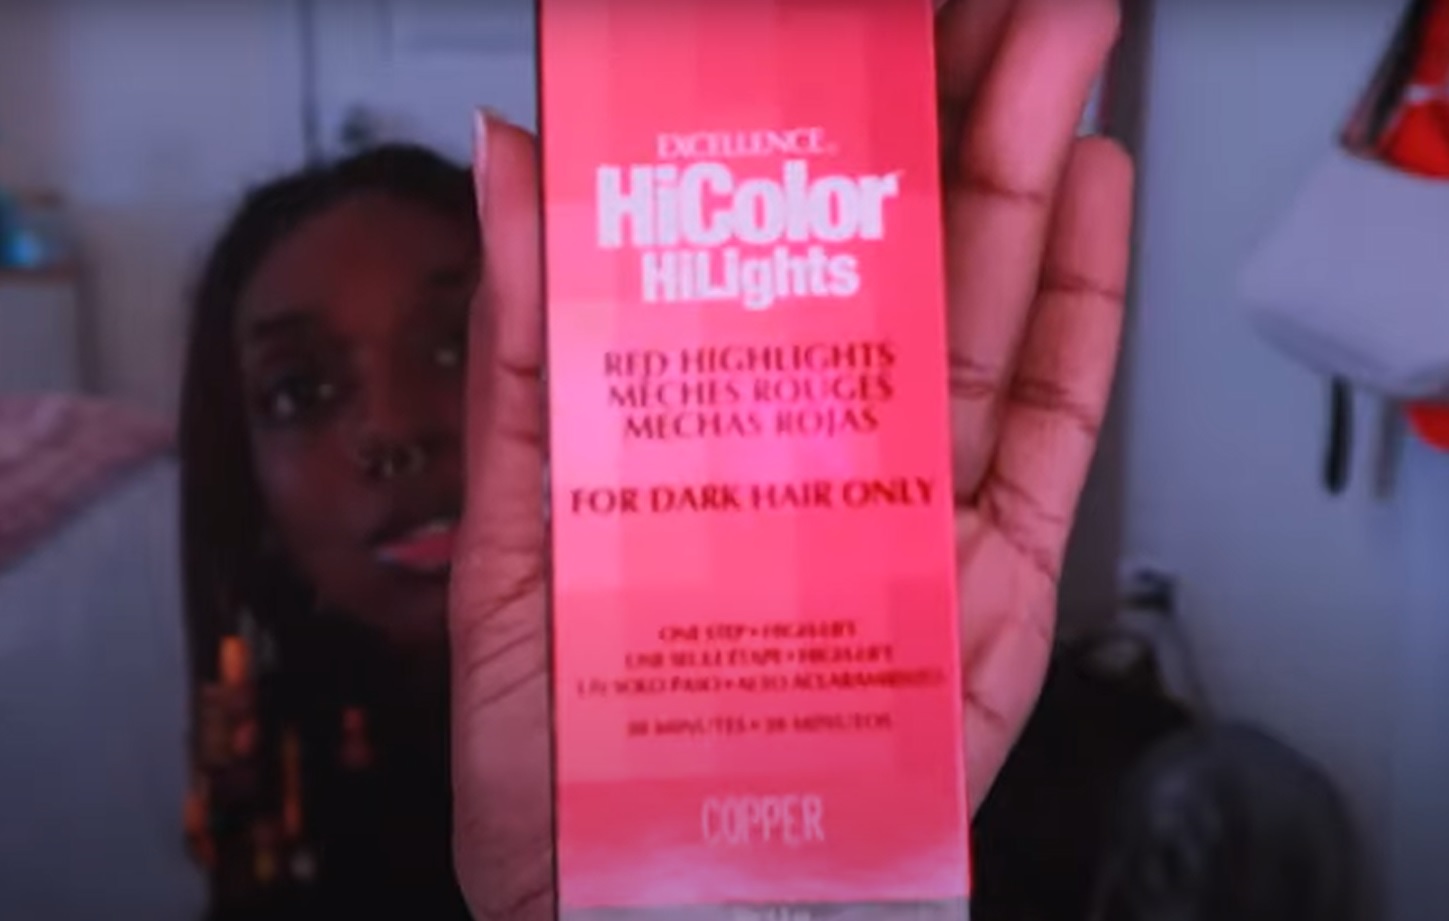 L’Oreal HiColor Copper HiLights For Dark Hair Only